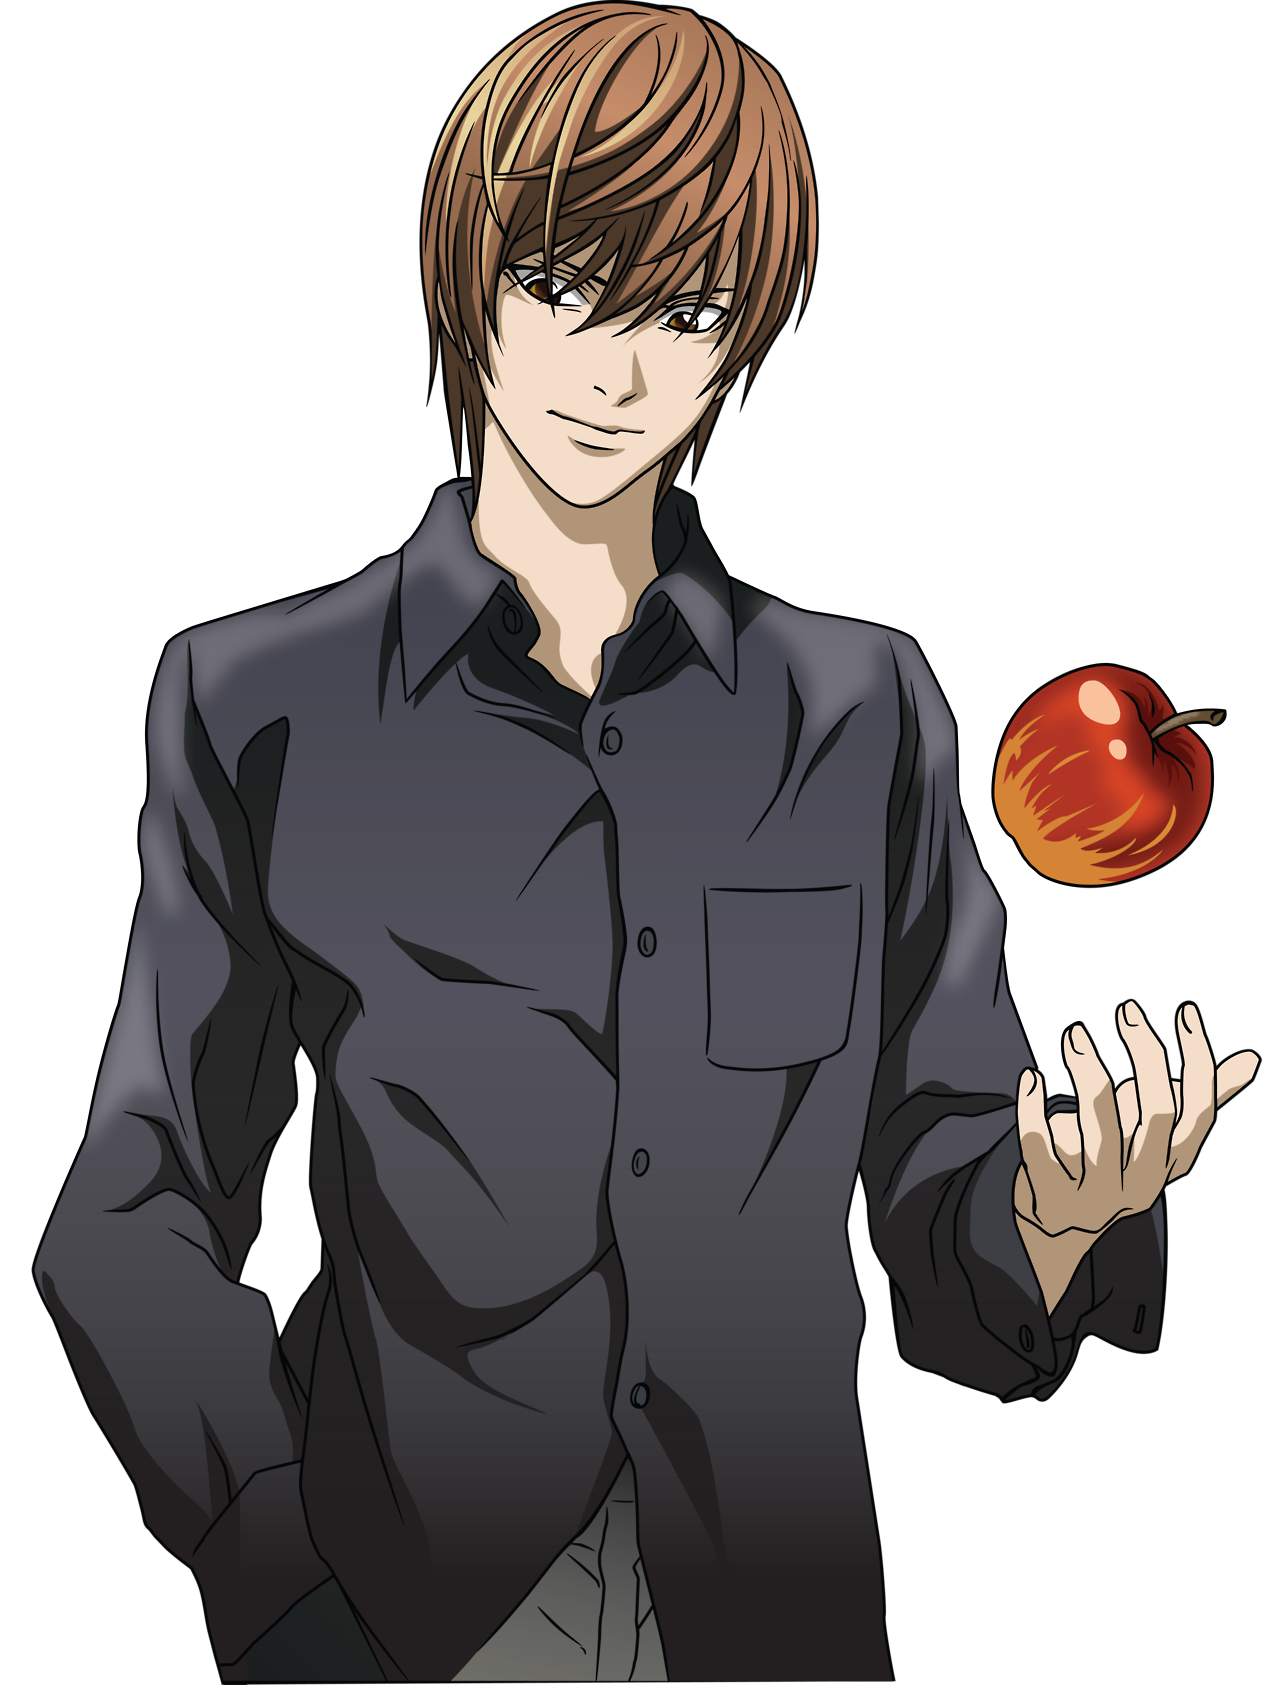 Image - Light yagami2.png | Death Note Wiki | FANDOM powered by Wikia